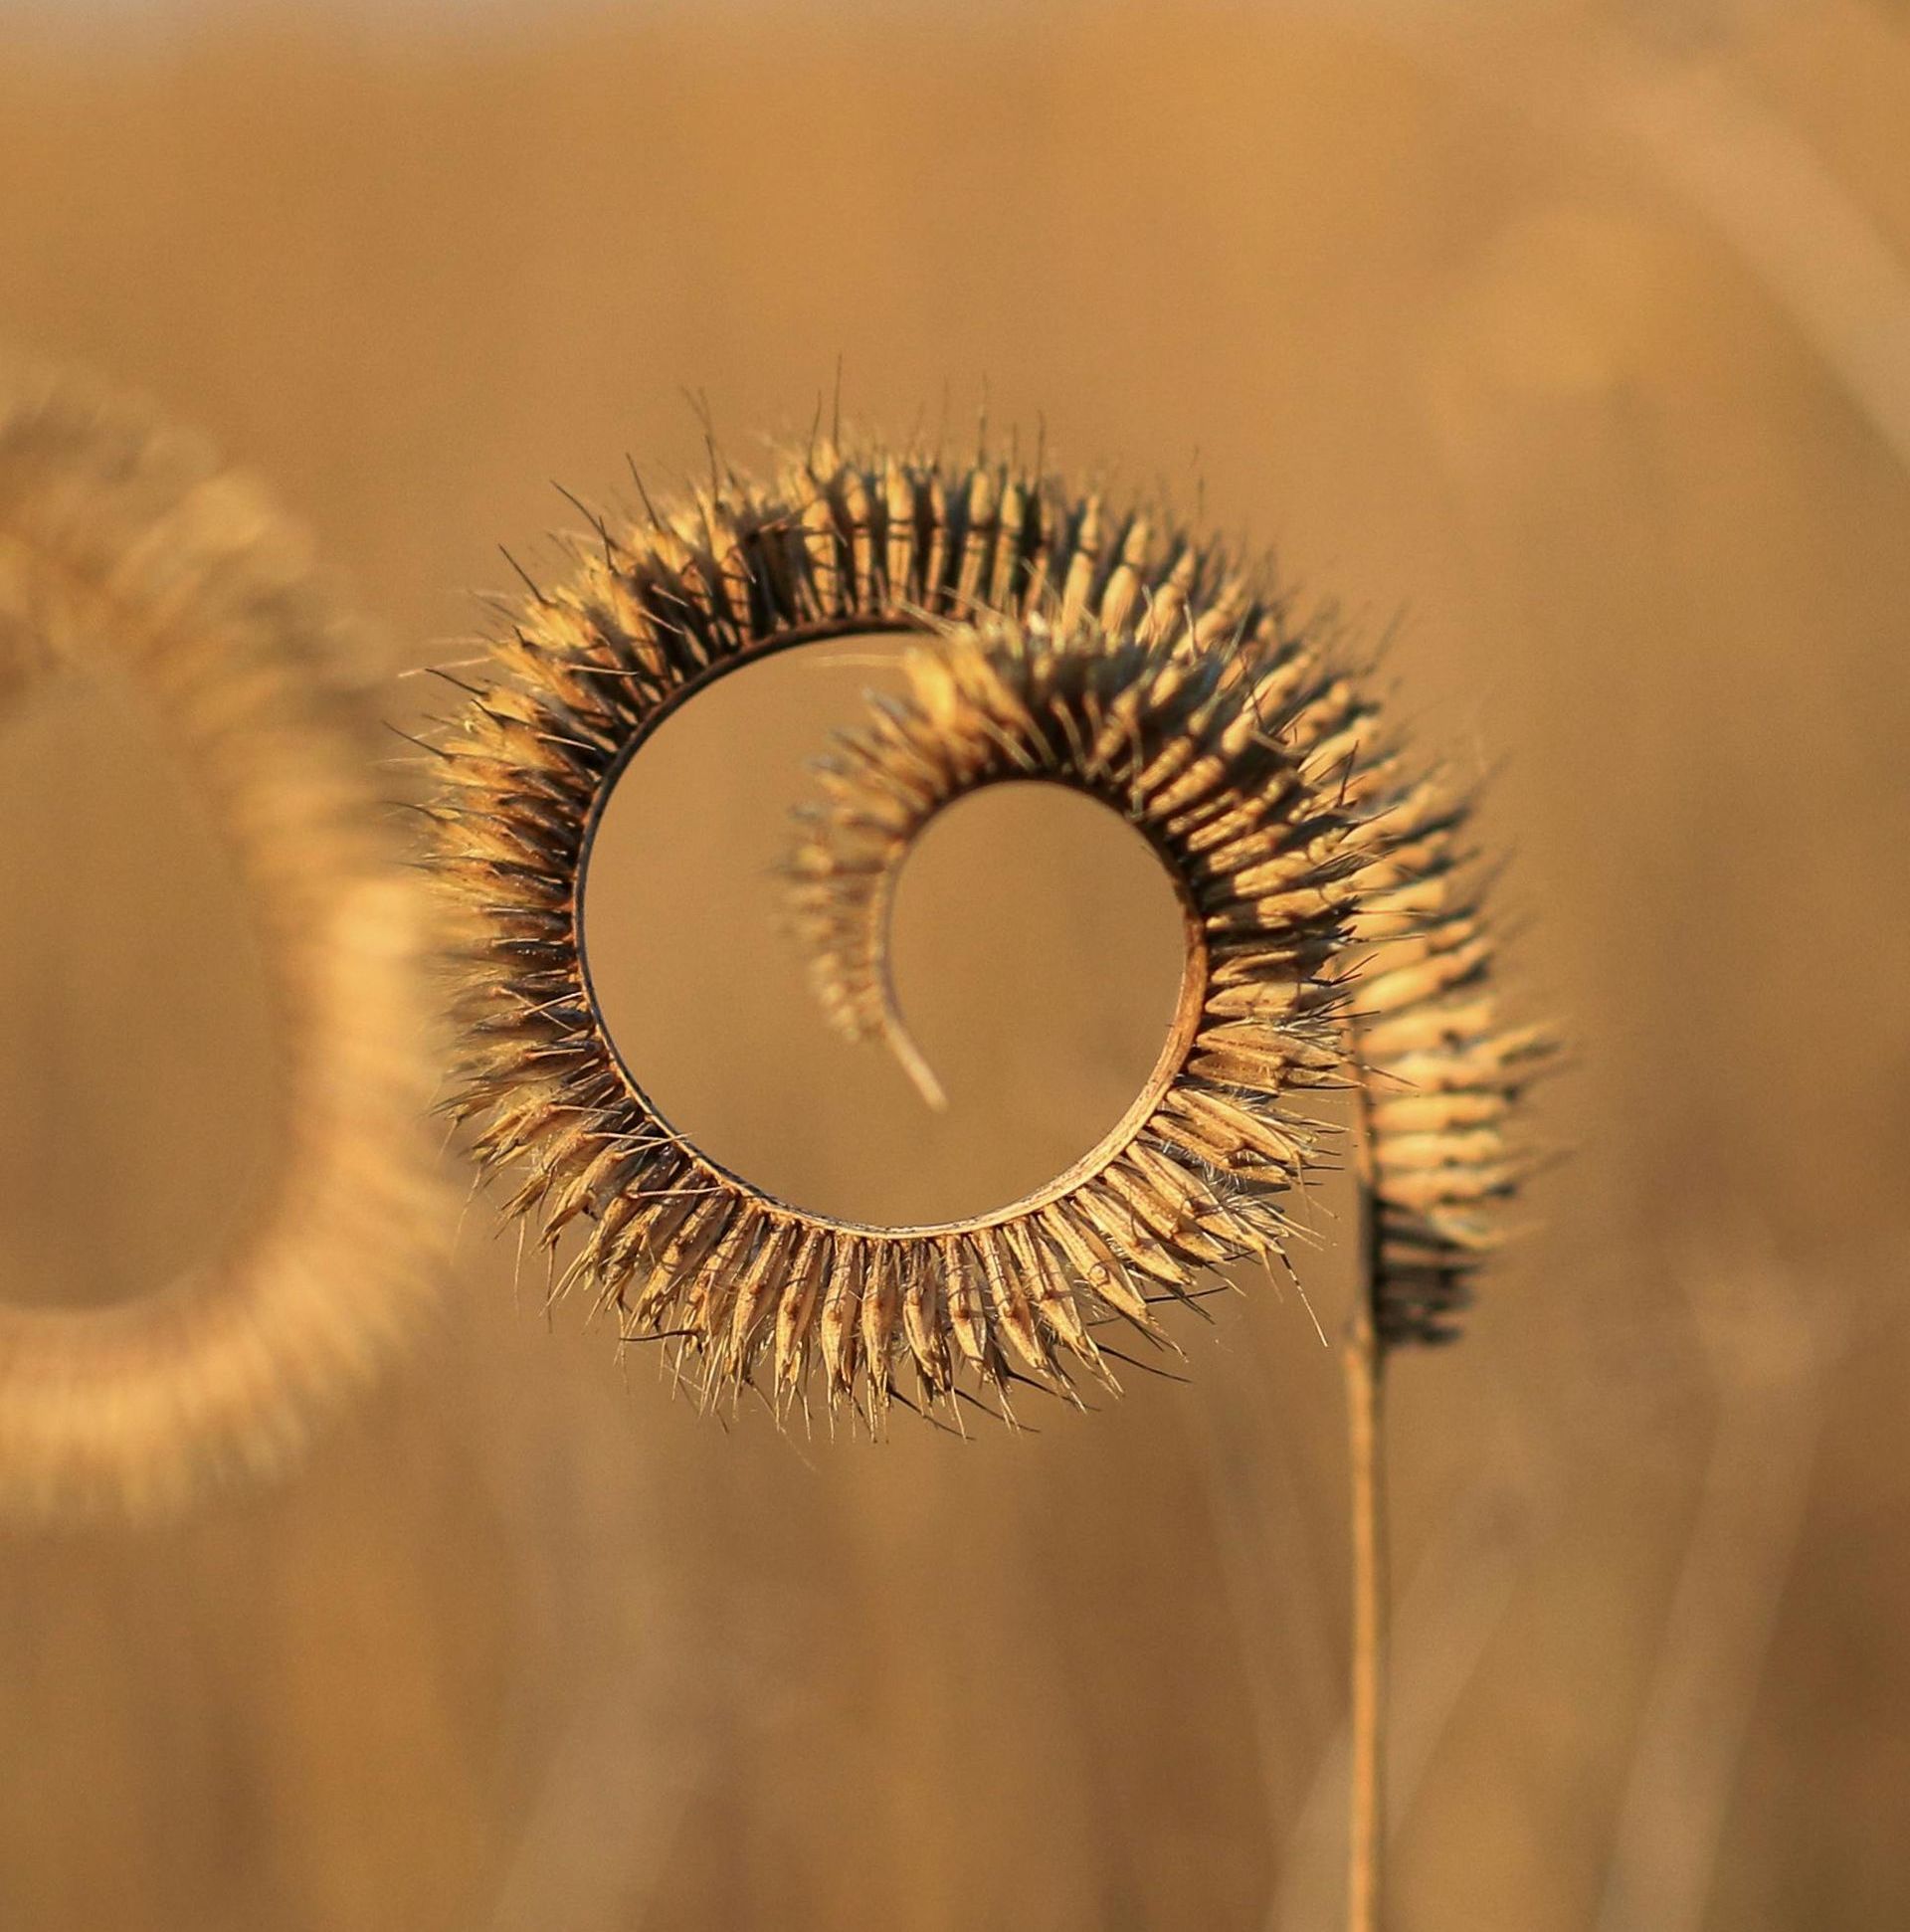 dryed grass with spiral shaped seed head